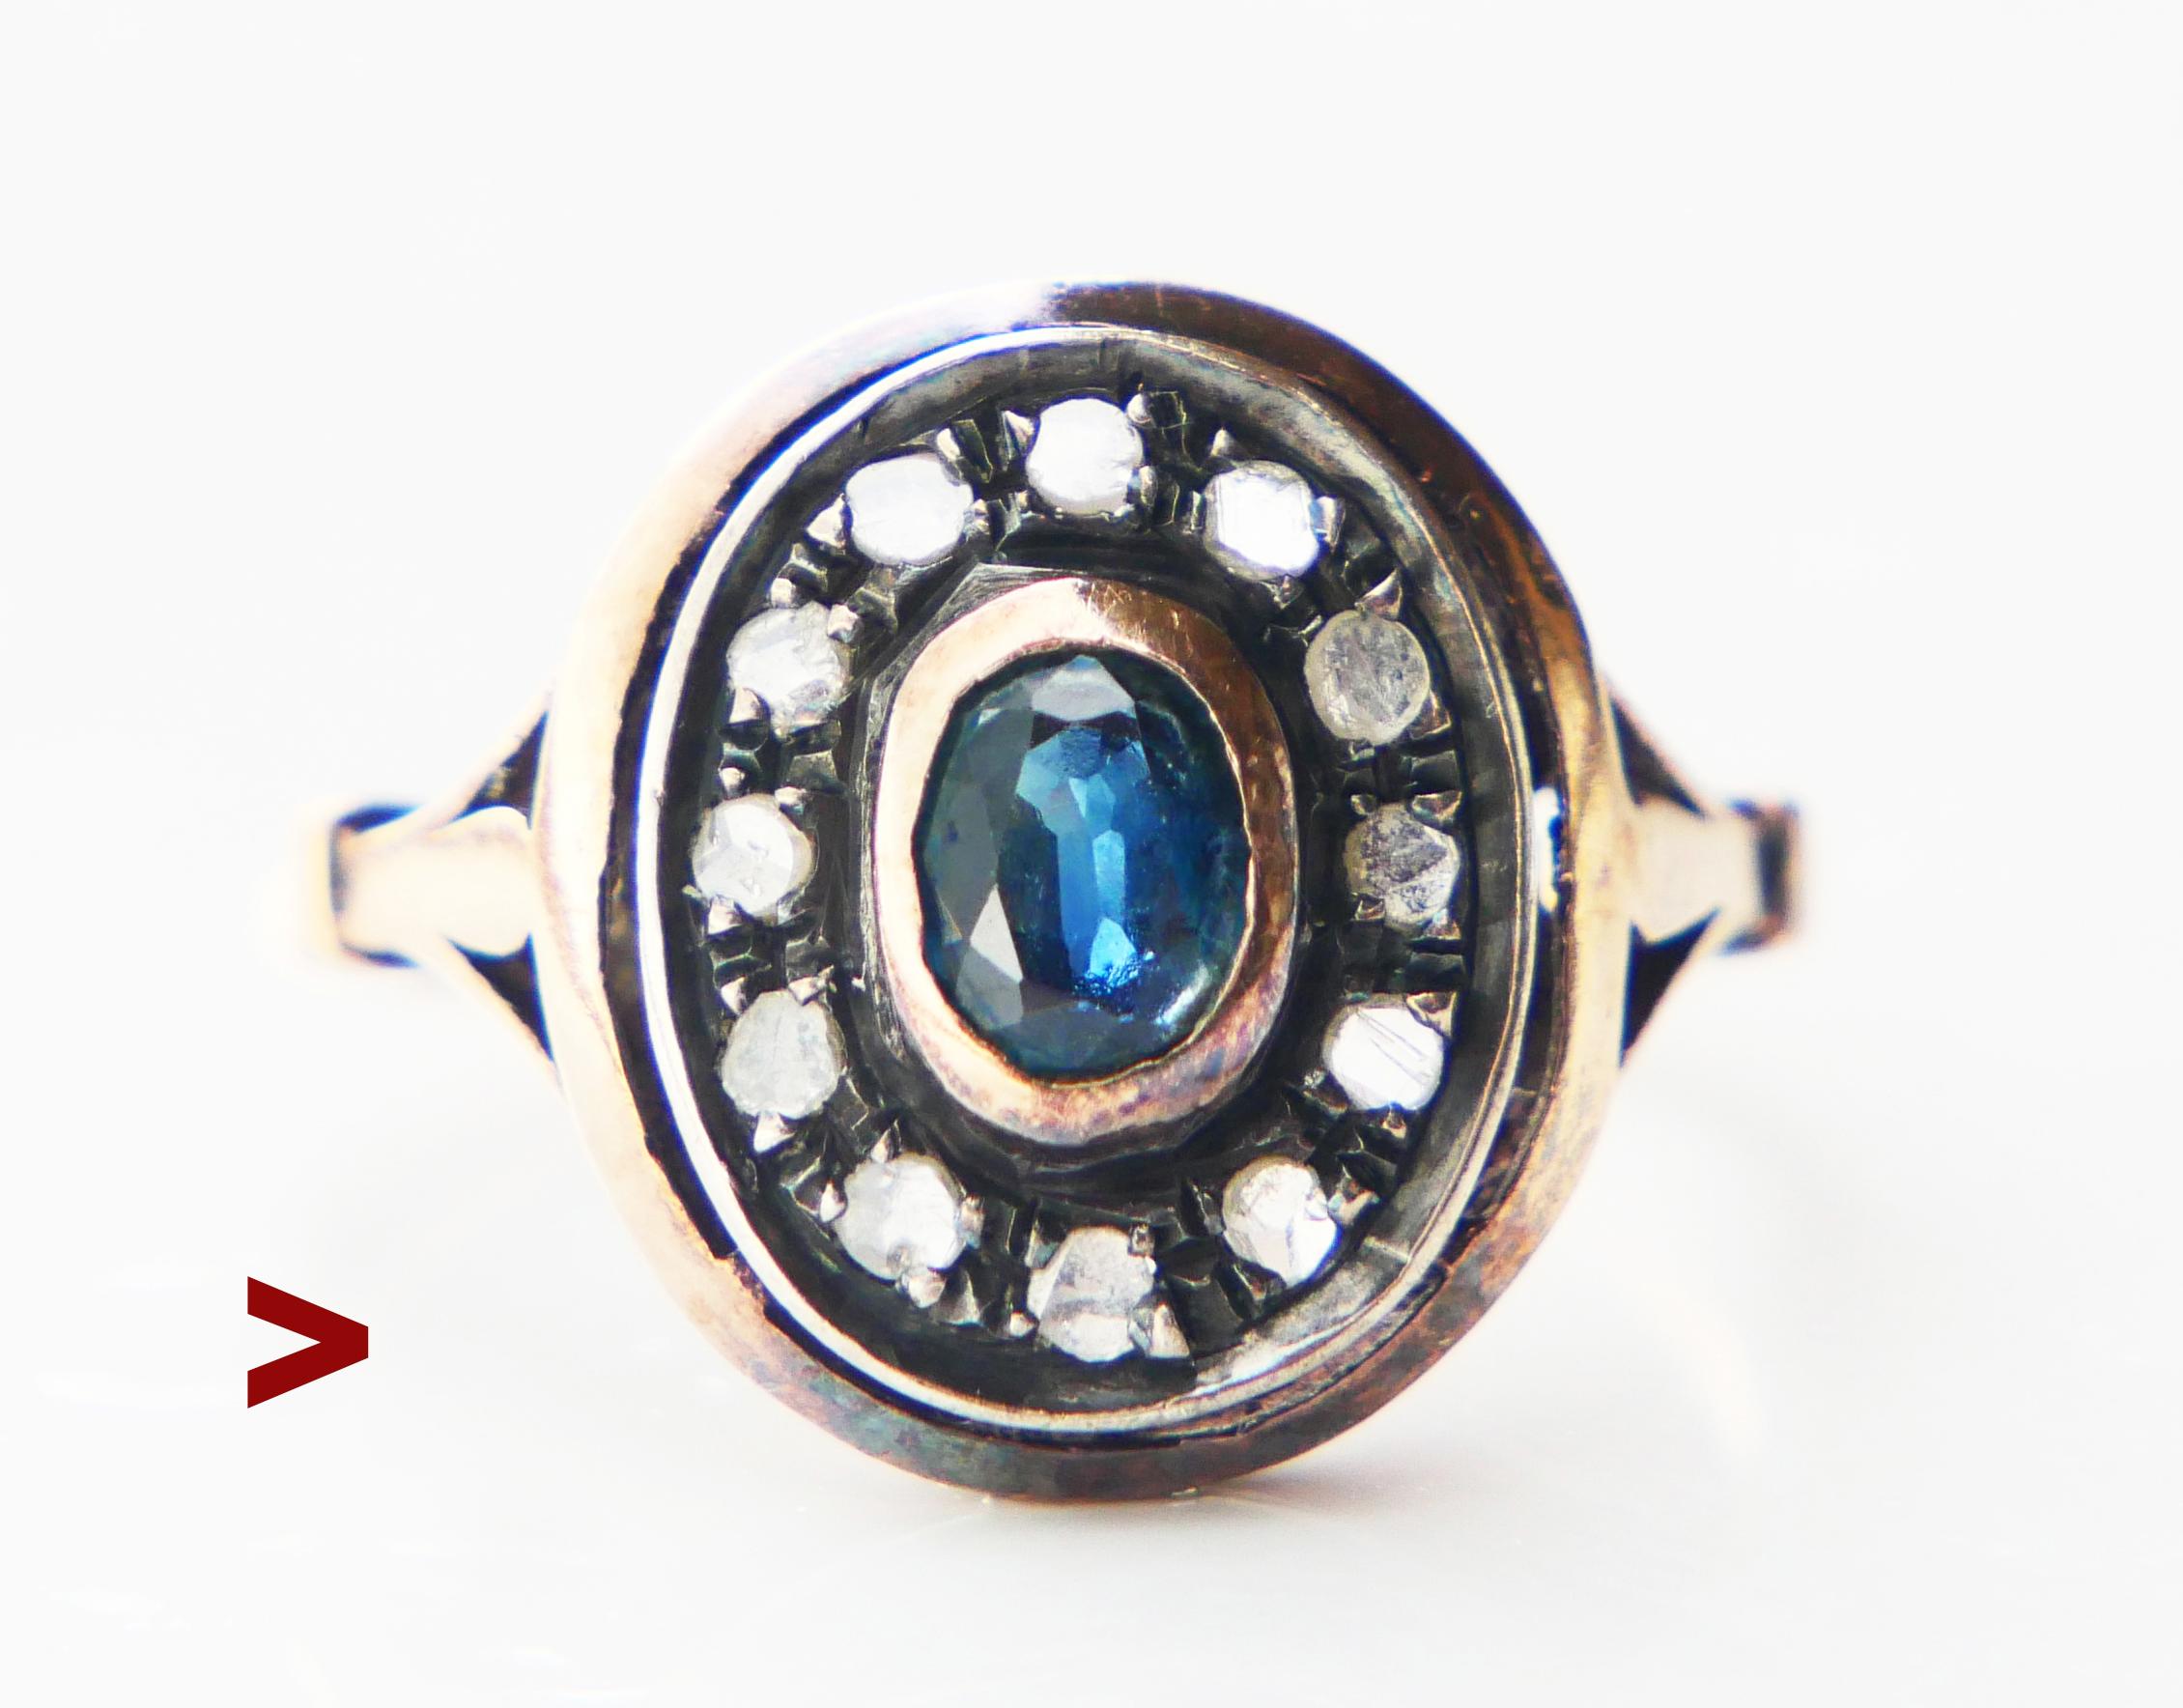 Italian Halo Ring with natural Blue - Green Sapphire and 12 rose-cut Diamonds.

Hand-made between the 1920s - 1930. sItalian hallmarks : 486,500, NA ( Naple s) band's metal tested 12K Rose Gold. Face of the crown is made of Silver or 12K White